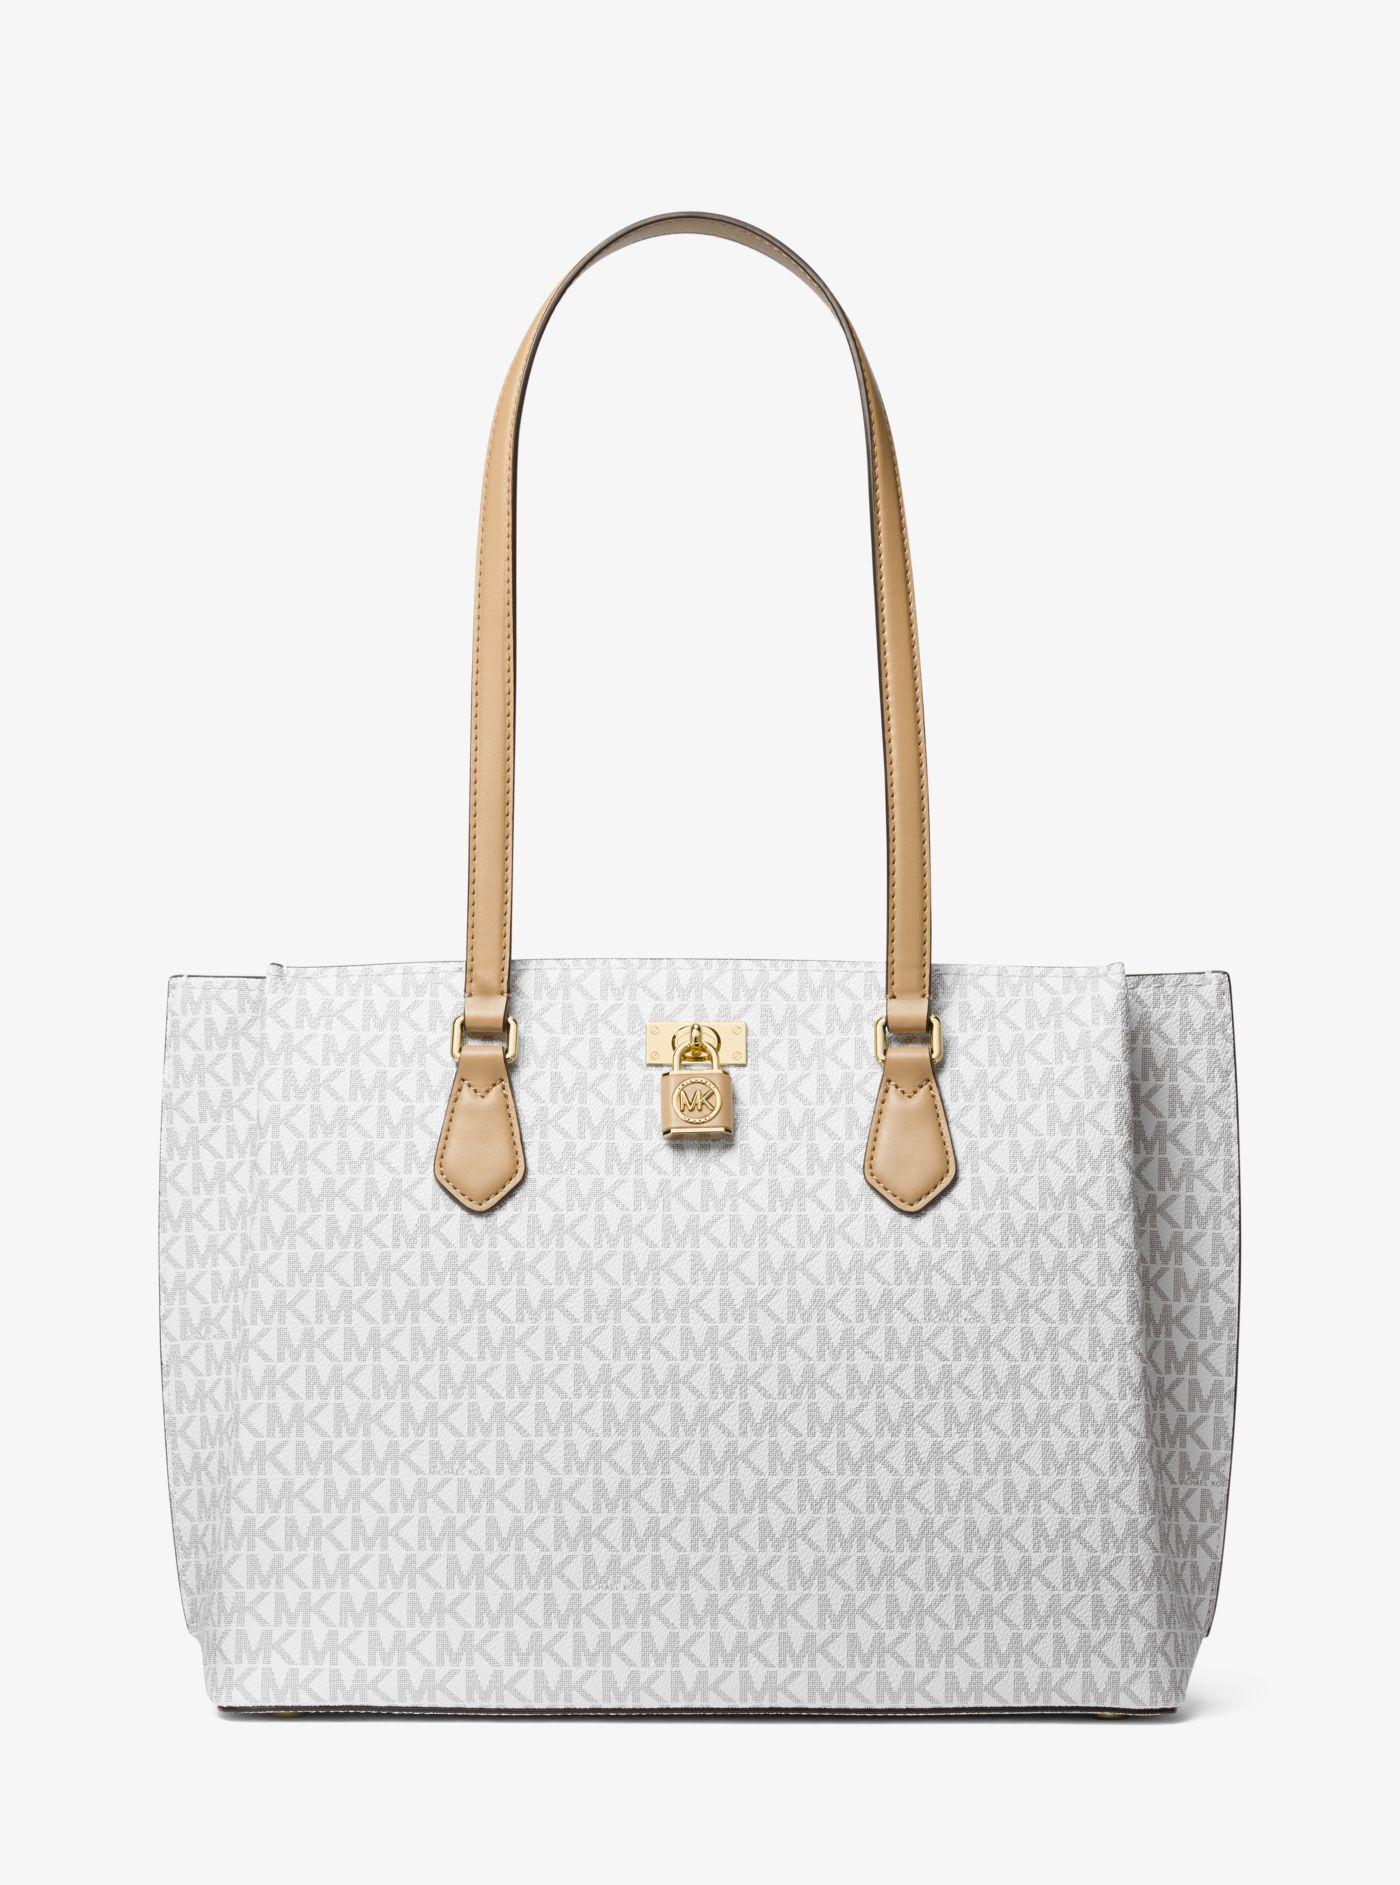 Michael Kors Ruby Large Logo Tote Bag in White | Lyst